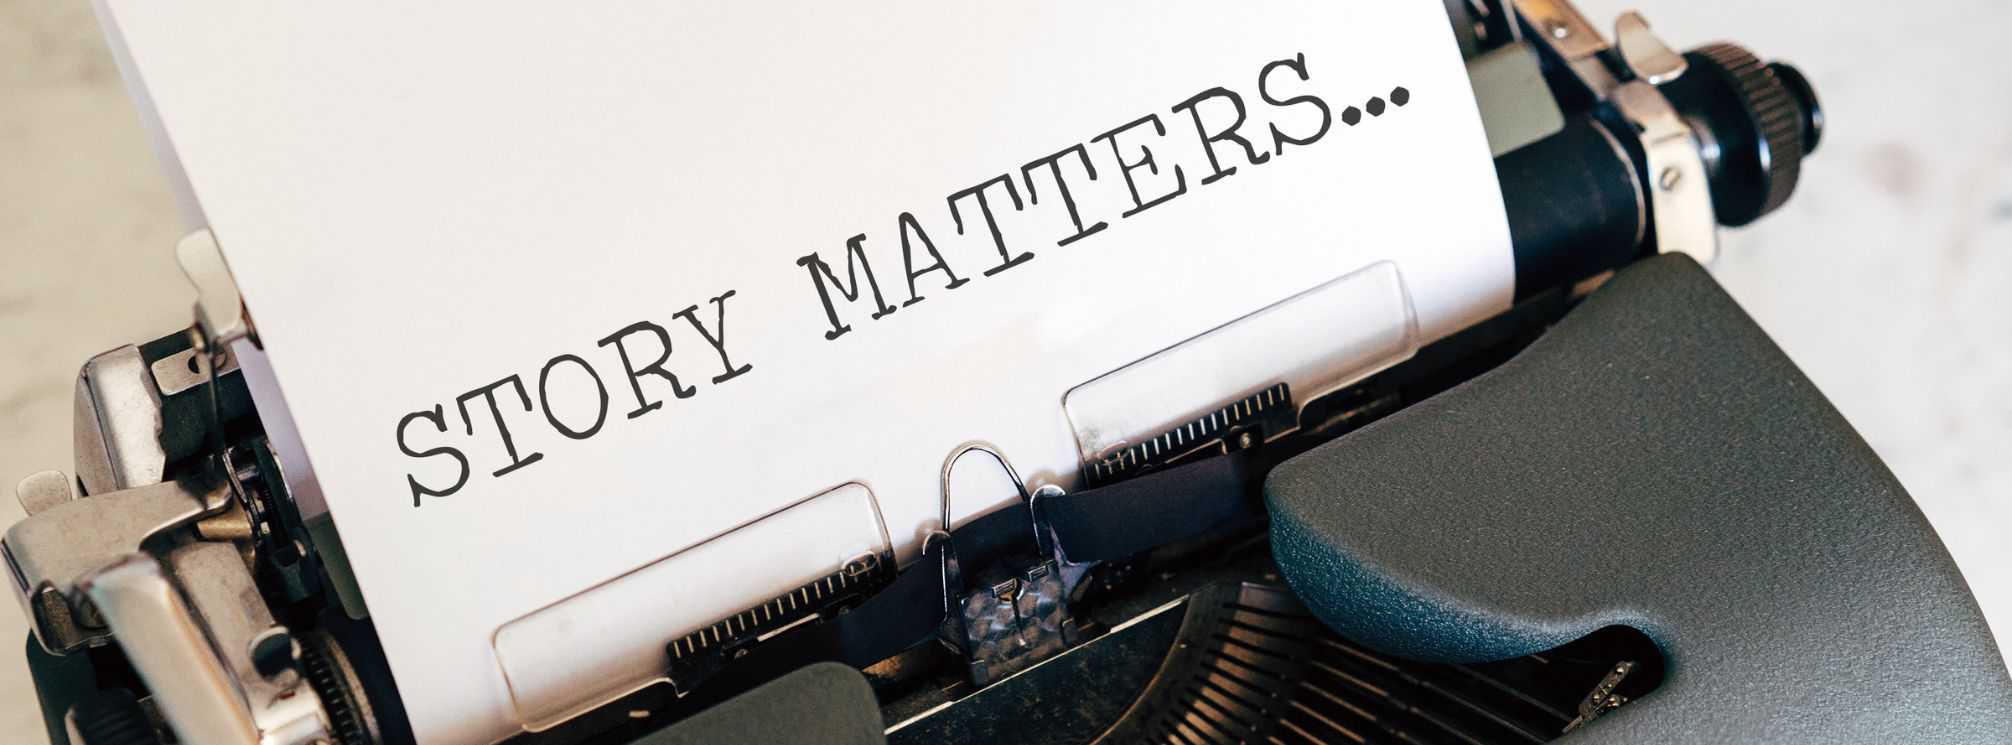 typewriter with the paper saying "story matters..."